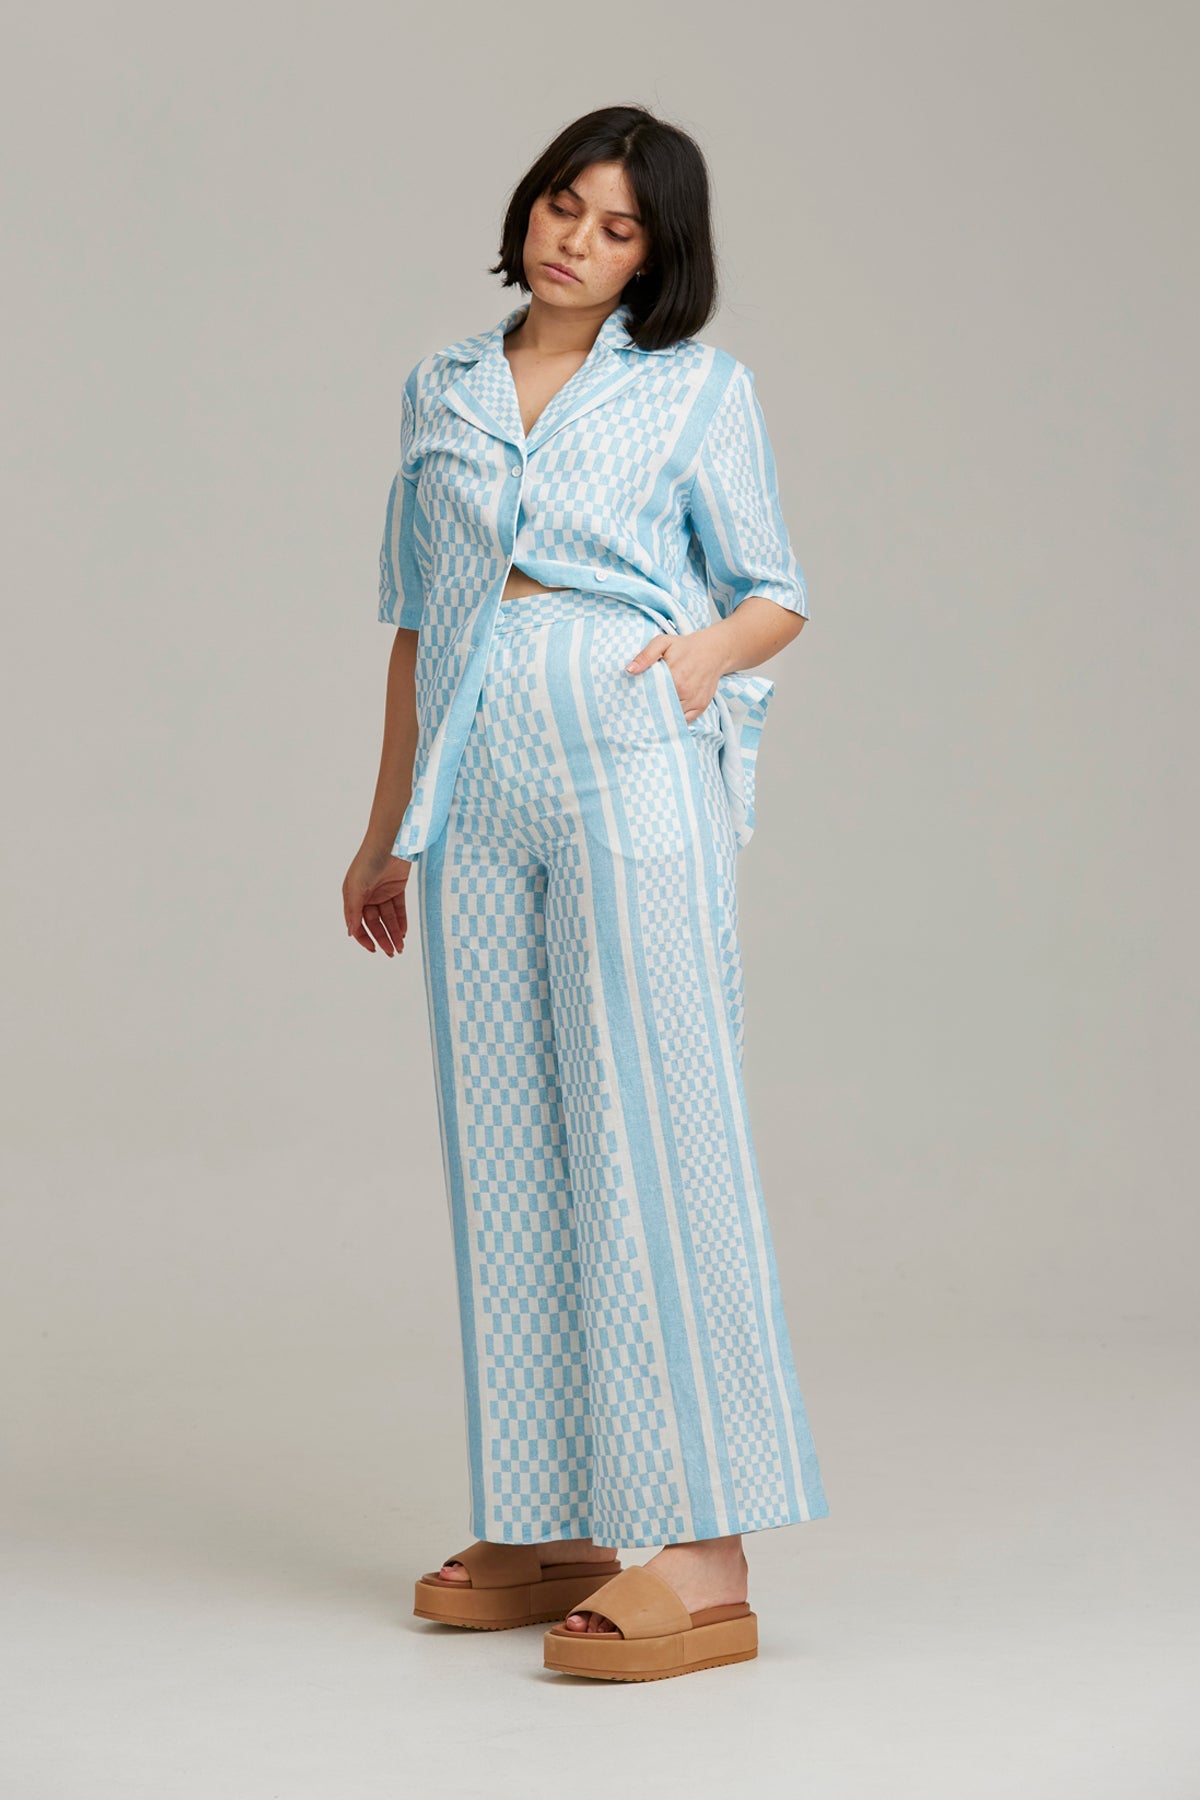 The Fifth Label - Vicinity Top - Azure Check